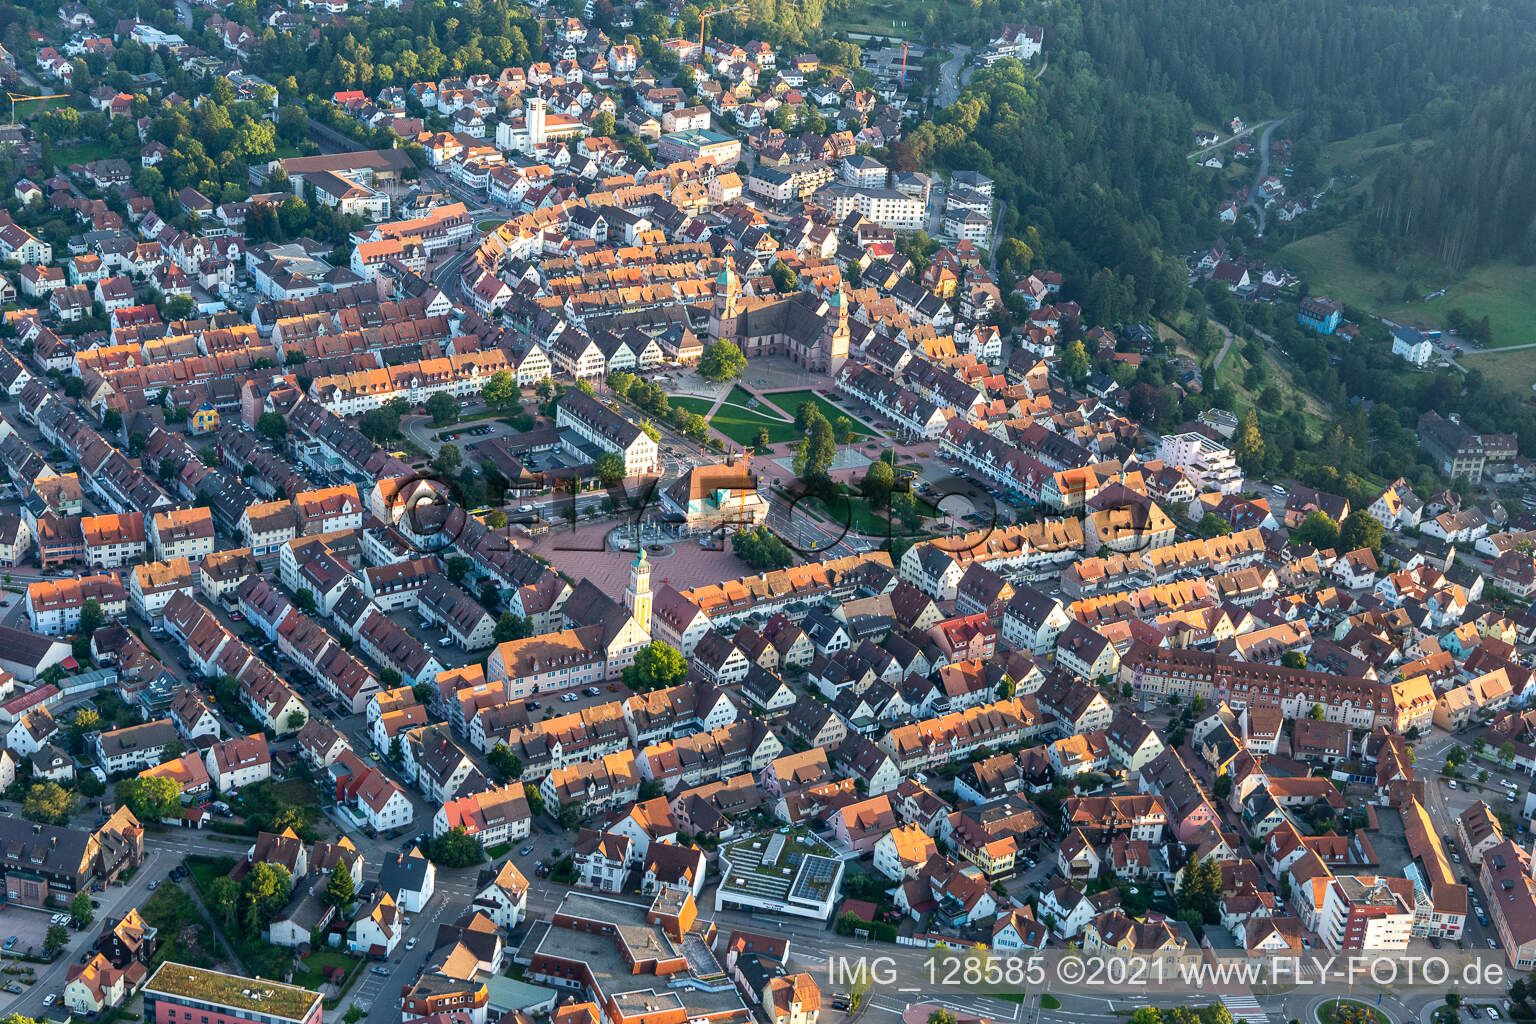 Largest marketplace in Germany in Freudenstadt in the state Baden-Wuerttemberg, Germany from above